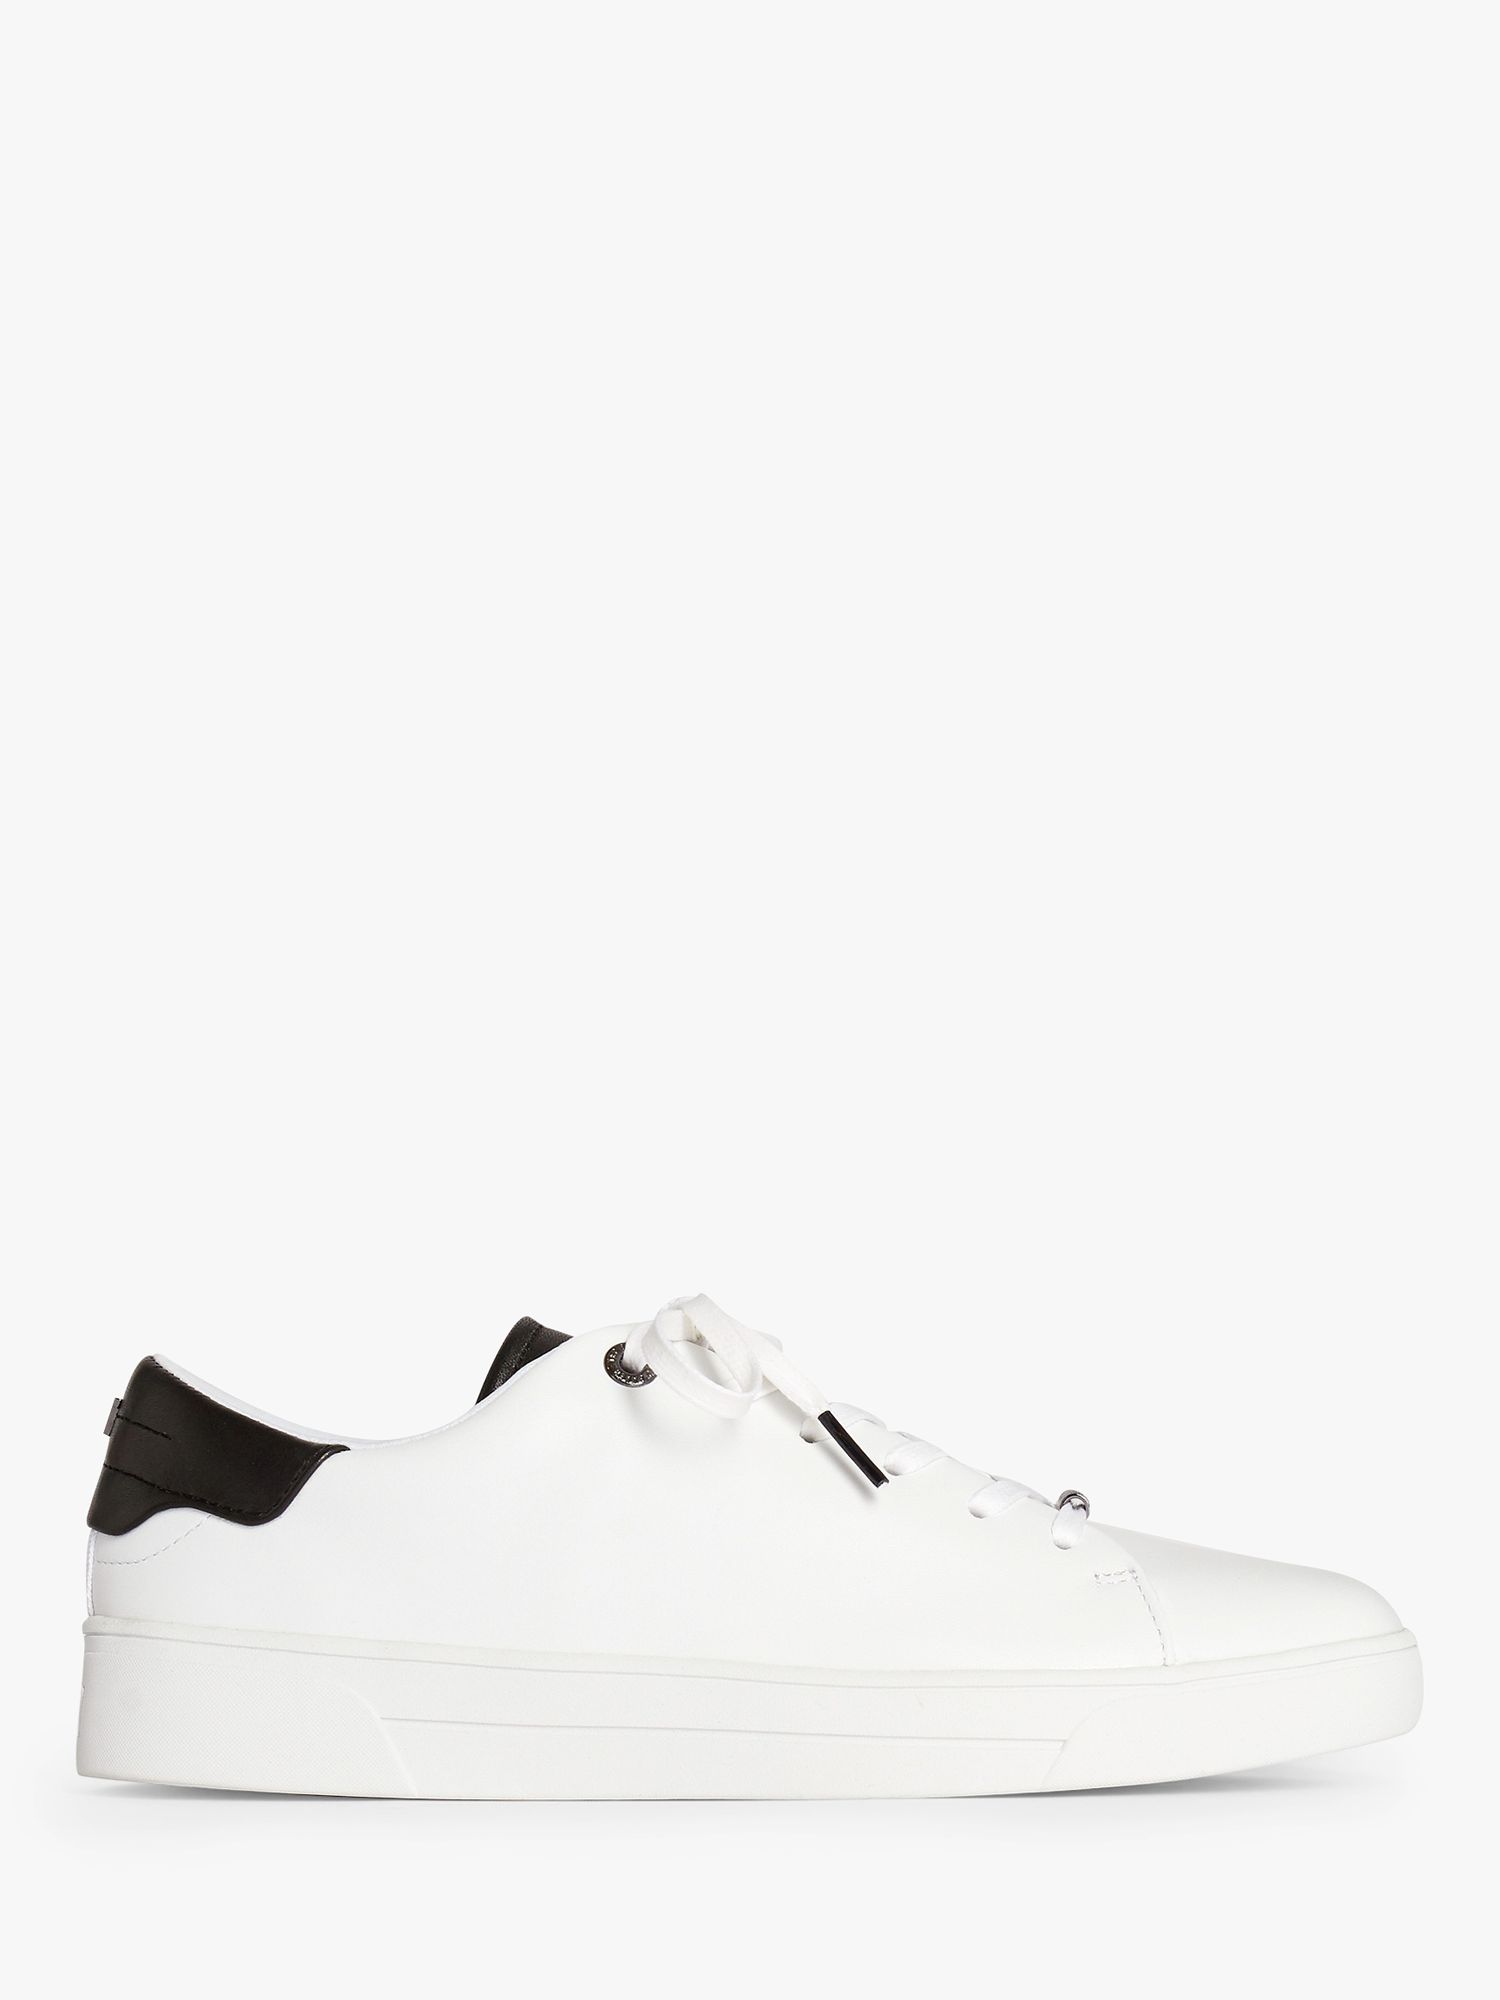 Ted Baker Zenib Leather Trainers, White/Black